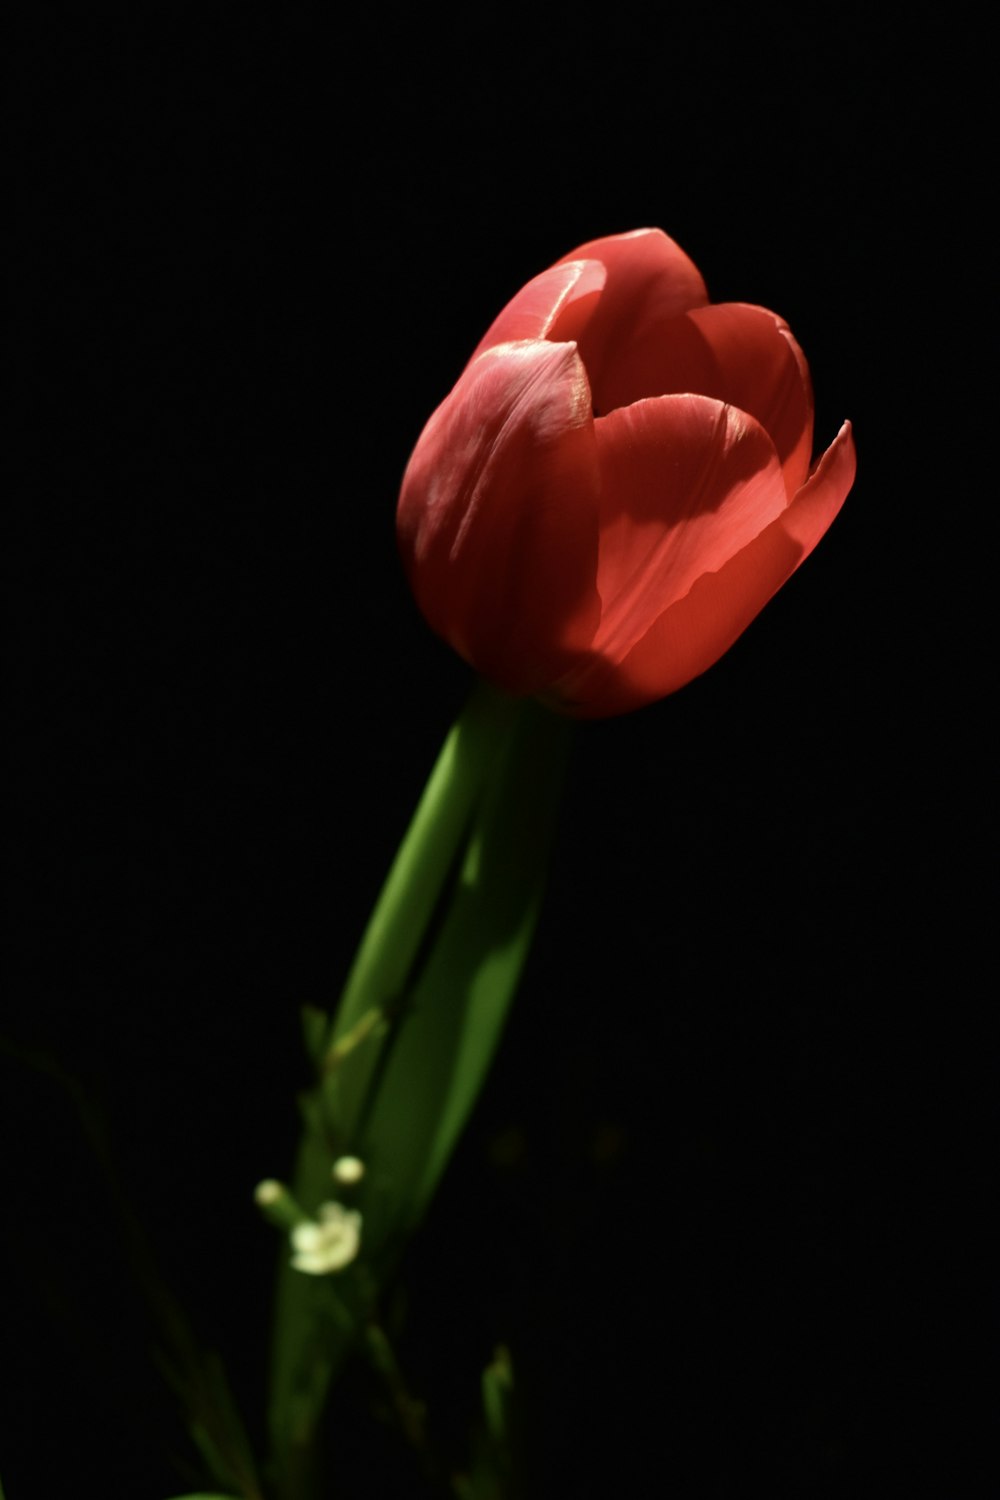 a single red tulip with a black background